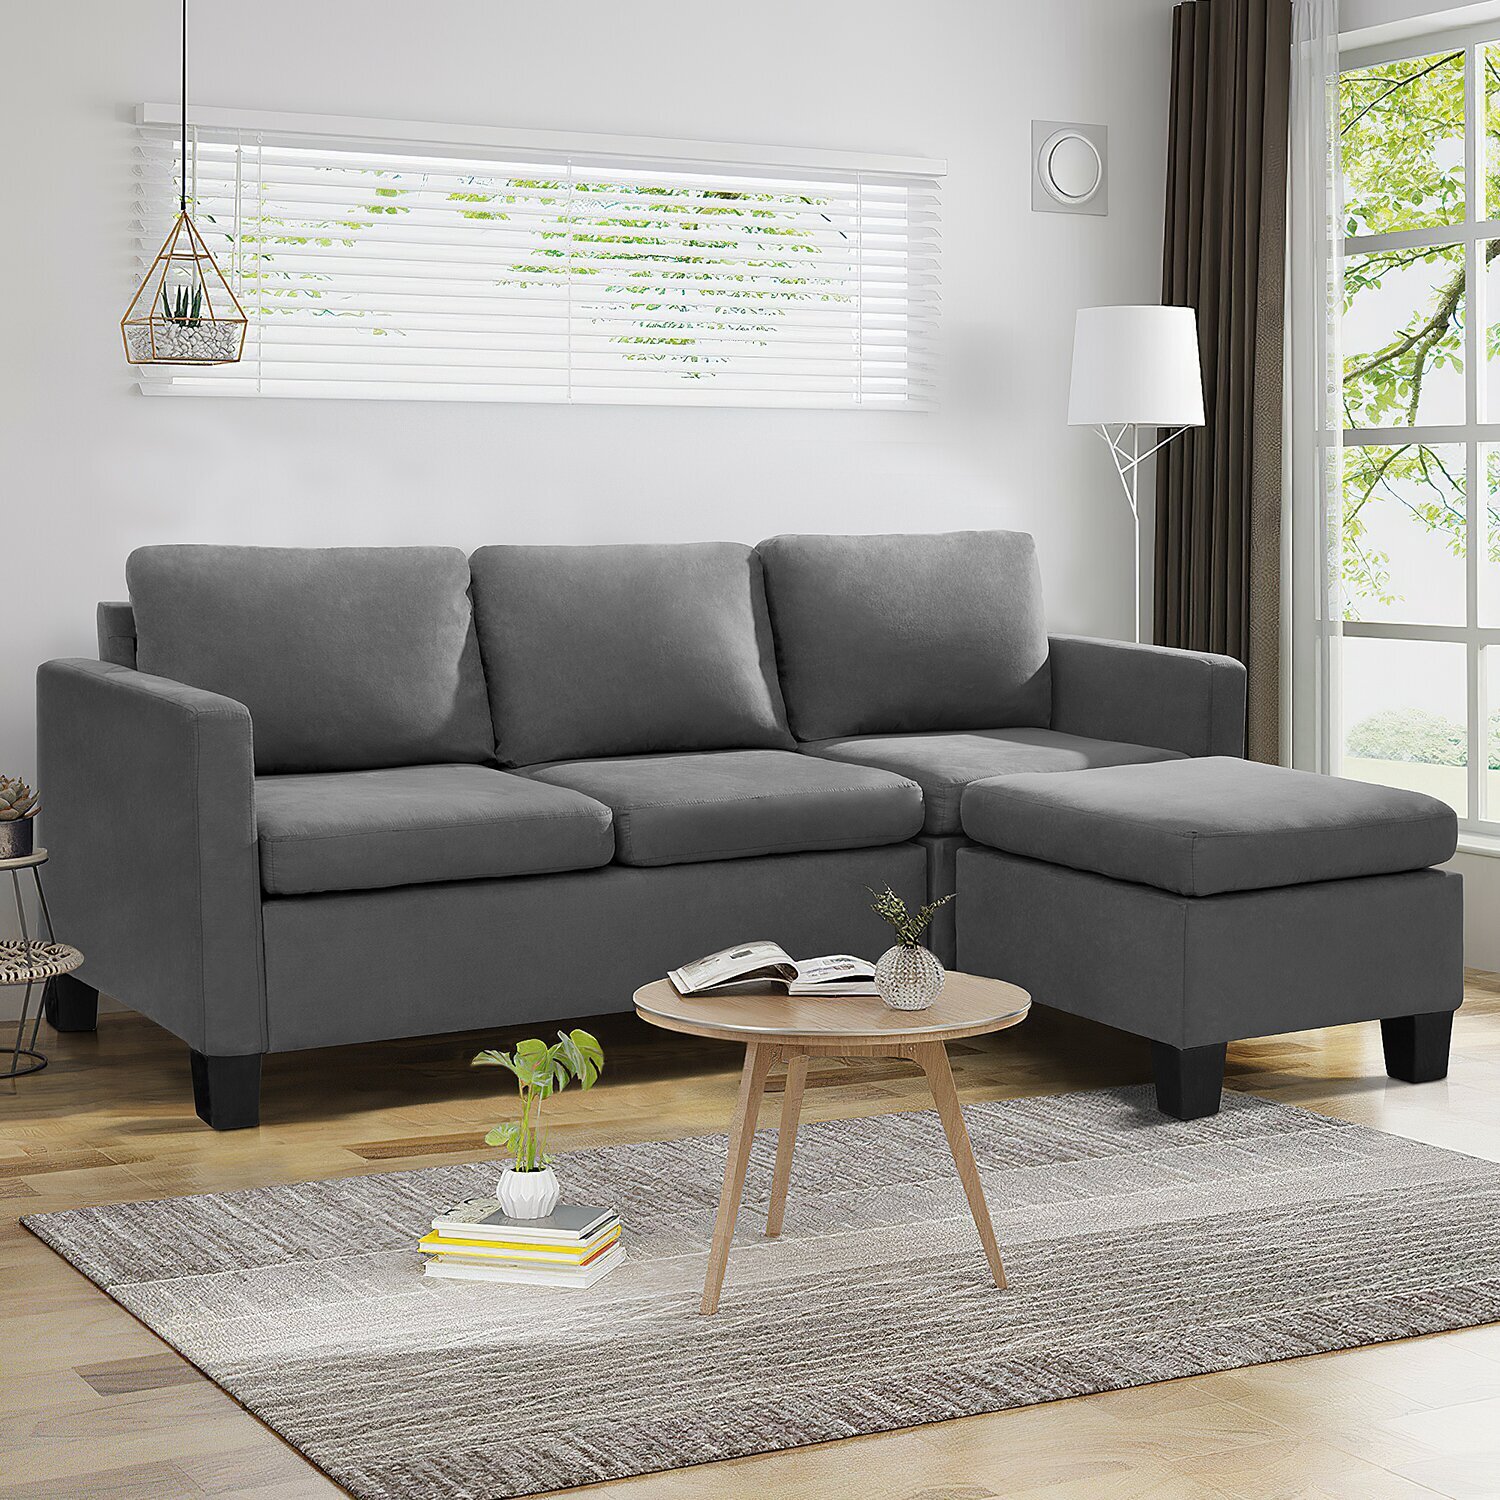 Grey Couch for Tiny Home